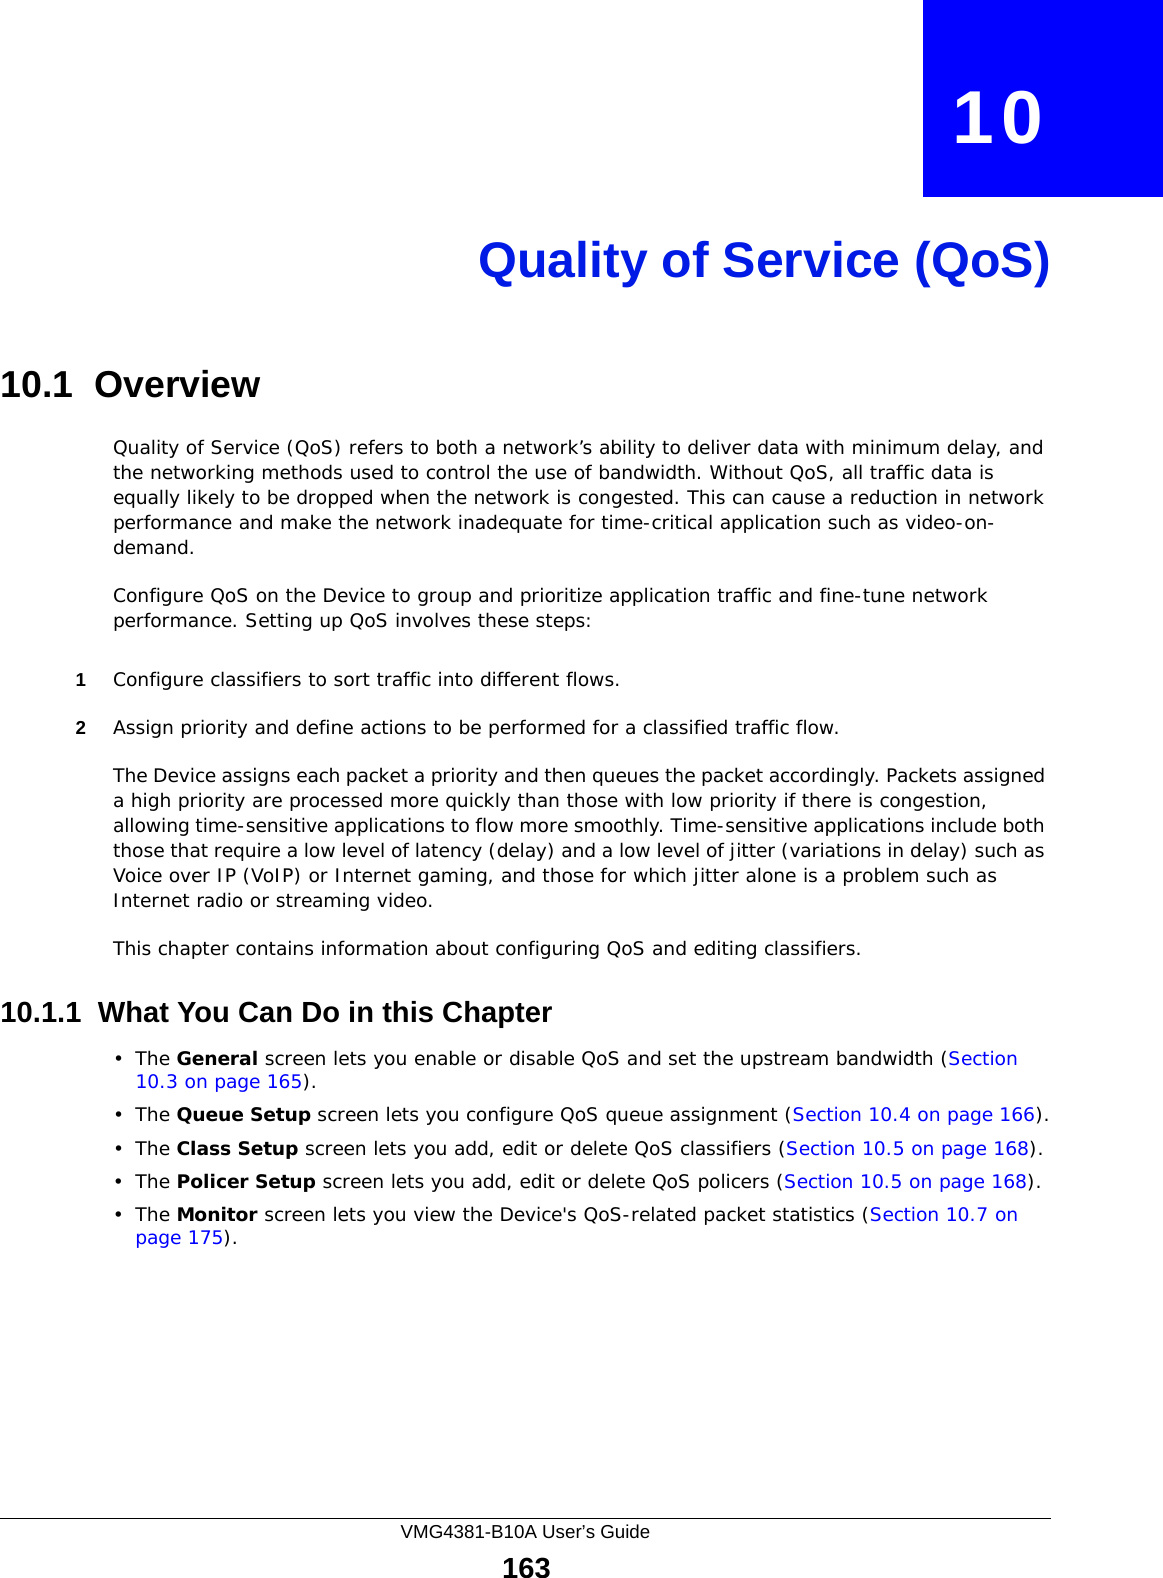 VMG4381-B10A User’s Guide163CHAPTER   10Quality of Service (QoS)10.1  Overview Quality of Service (QoS) refers to both a network’s ability to deliver data with minimum delay, and the networking methods used to control the use of bandwidth. Without QoS, all traffic data is equally likely to be dropped when the network is congested. This can cause a reduction in network performance and make the network inadequate for time-critical application such as video-on-demand.Configure QoS on the Device to group and prioritize application traffic and fine-tune network performance. Setting up QoS involves these steps:1Configure classifiers to sort traffic into different flows. 2Assign priority and define actions to be performed for a classified traffic flow. The Device assigns each packet a priority and then queues the packet accordingly. Packets assigned a high priority are processed more quickly than those with low priority if there is congestion, allowing time-sensitive applications to flow more smoothly. Time-sensitive applications include both those that require a low level of latency (delay) and a low level of jitter (variations in delay) such as Voice over IP (VoIP) or Internet gaming, and those for which jitter alone is a problem such as Internet radio or streaming video.This chapter contains information about configuring QoS and editing classifiers.10.1.1  What You Can Do in this Chapter•The General screen lets you enable or disable QoS and set the upstream bandwidth (Section 10.3 on page 165).•The Queue Setup screen lets you configure QoS queue assignment (Section 10.4 on page 166).•The Class Setup screen lets you add, edit or delete QoS classifiers (Section 10.5 on page 168).•The Policer Setup screen lets you add, edit or delete QoS policers (Section 10.5 on page 168).•The Monitor screen lets you view the Device&apos;s QoS-related packet statistics (Section 10.7 on page 175).